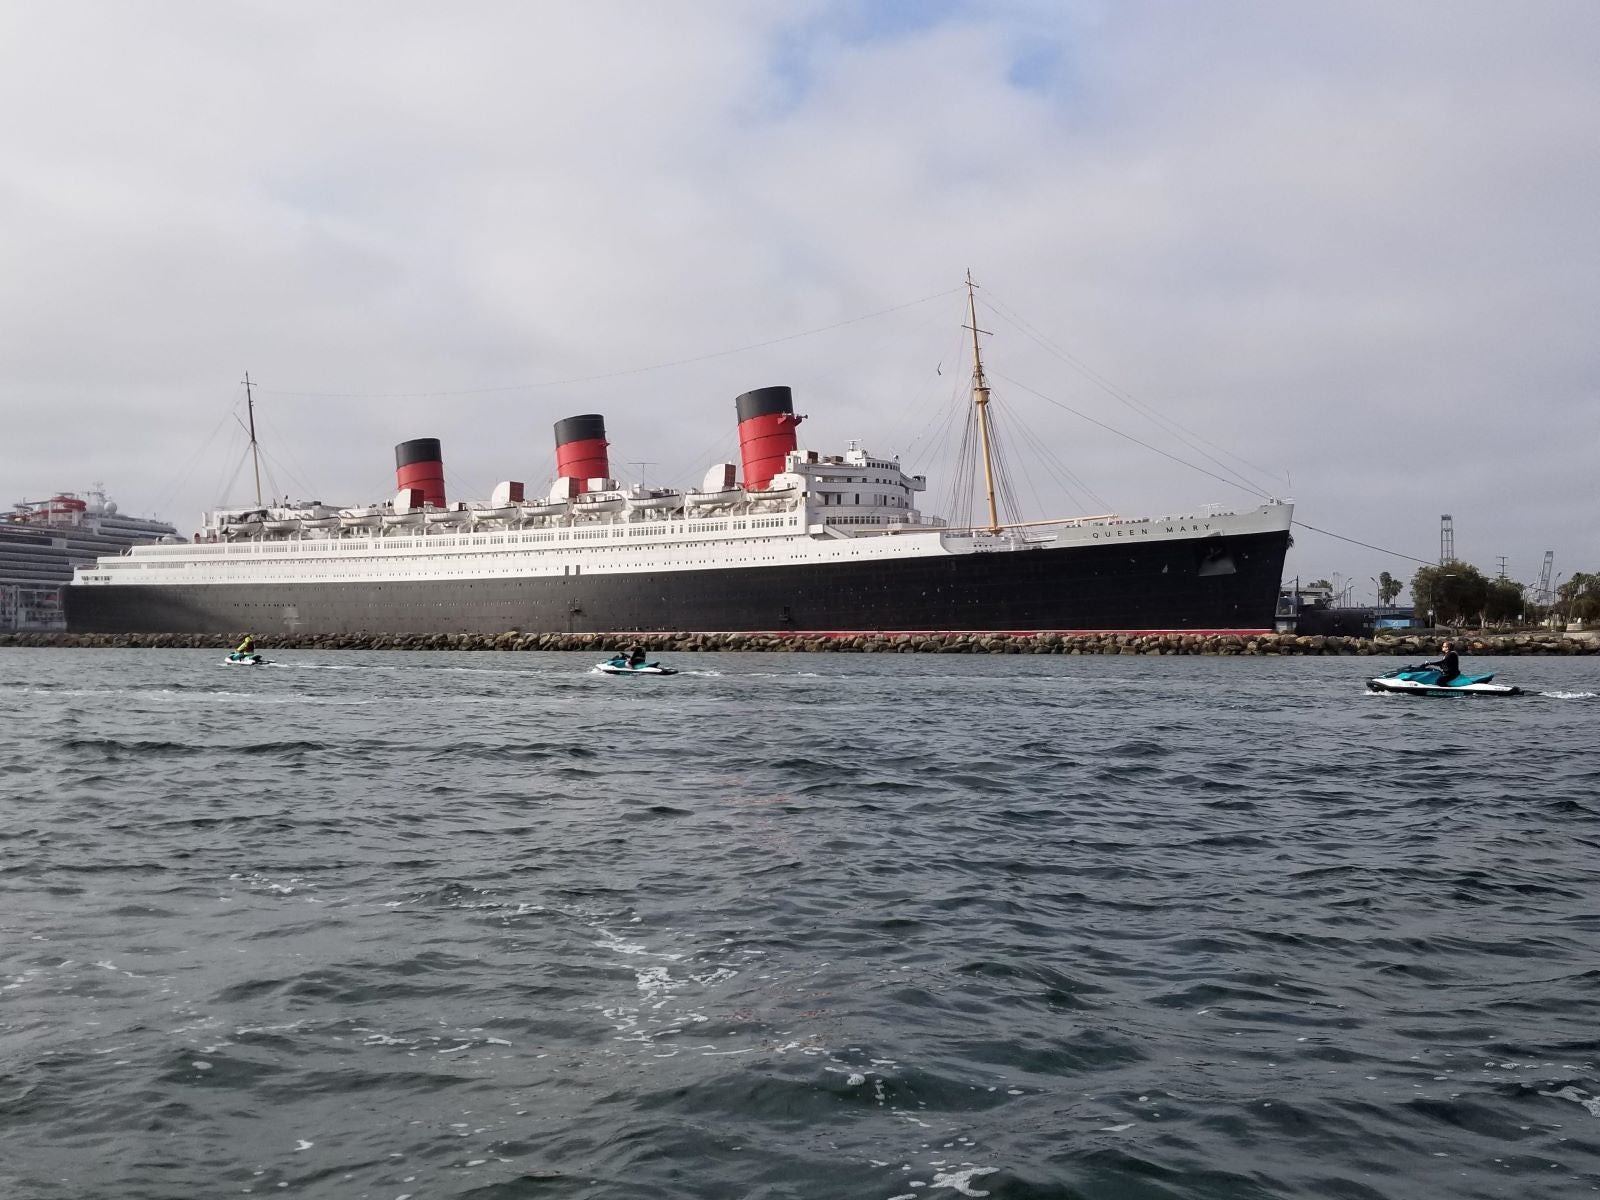 The Queen Mary docked in Long Beach